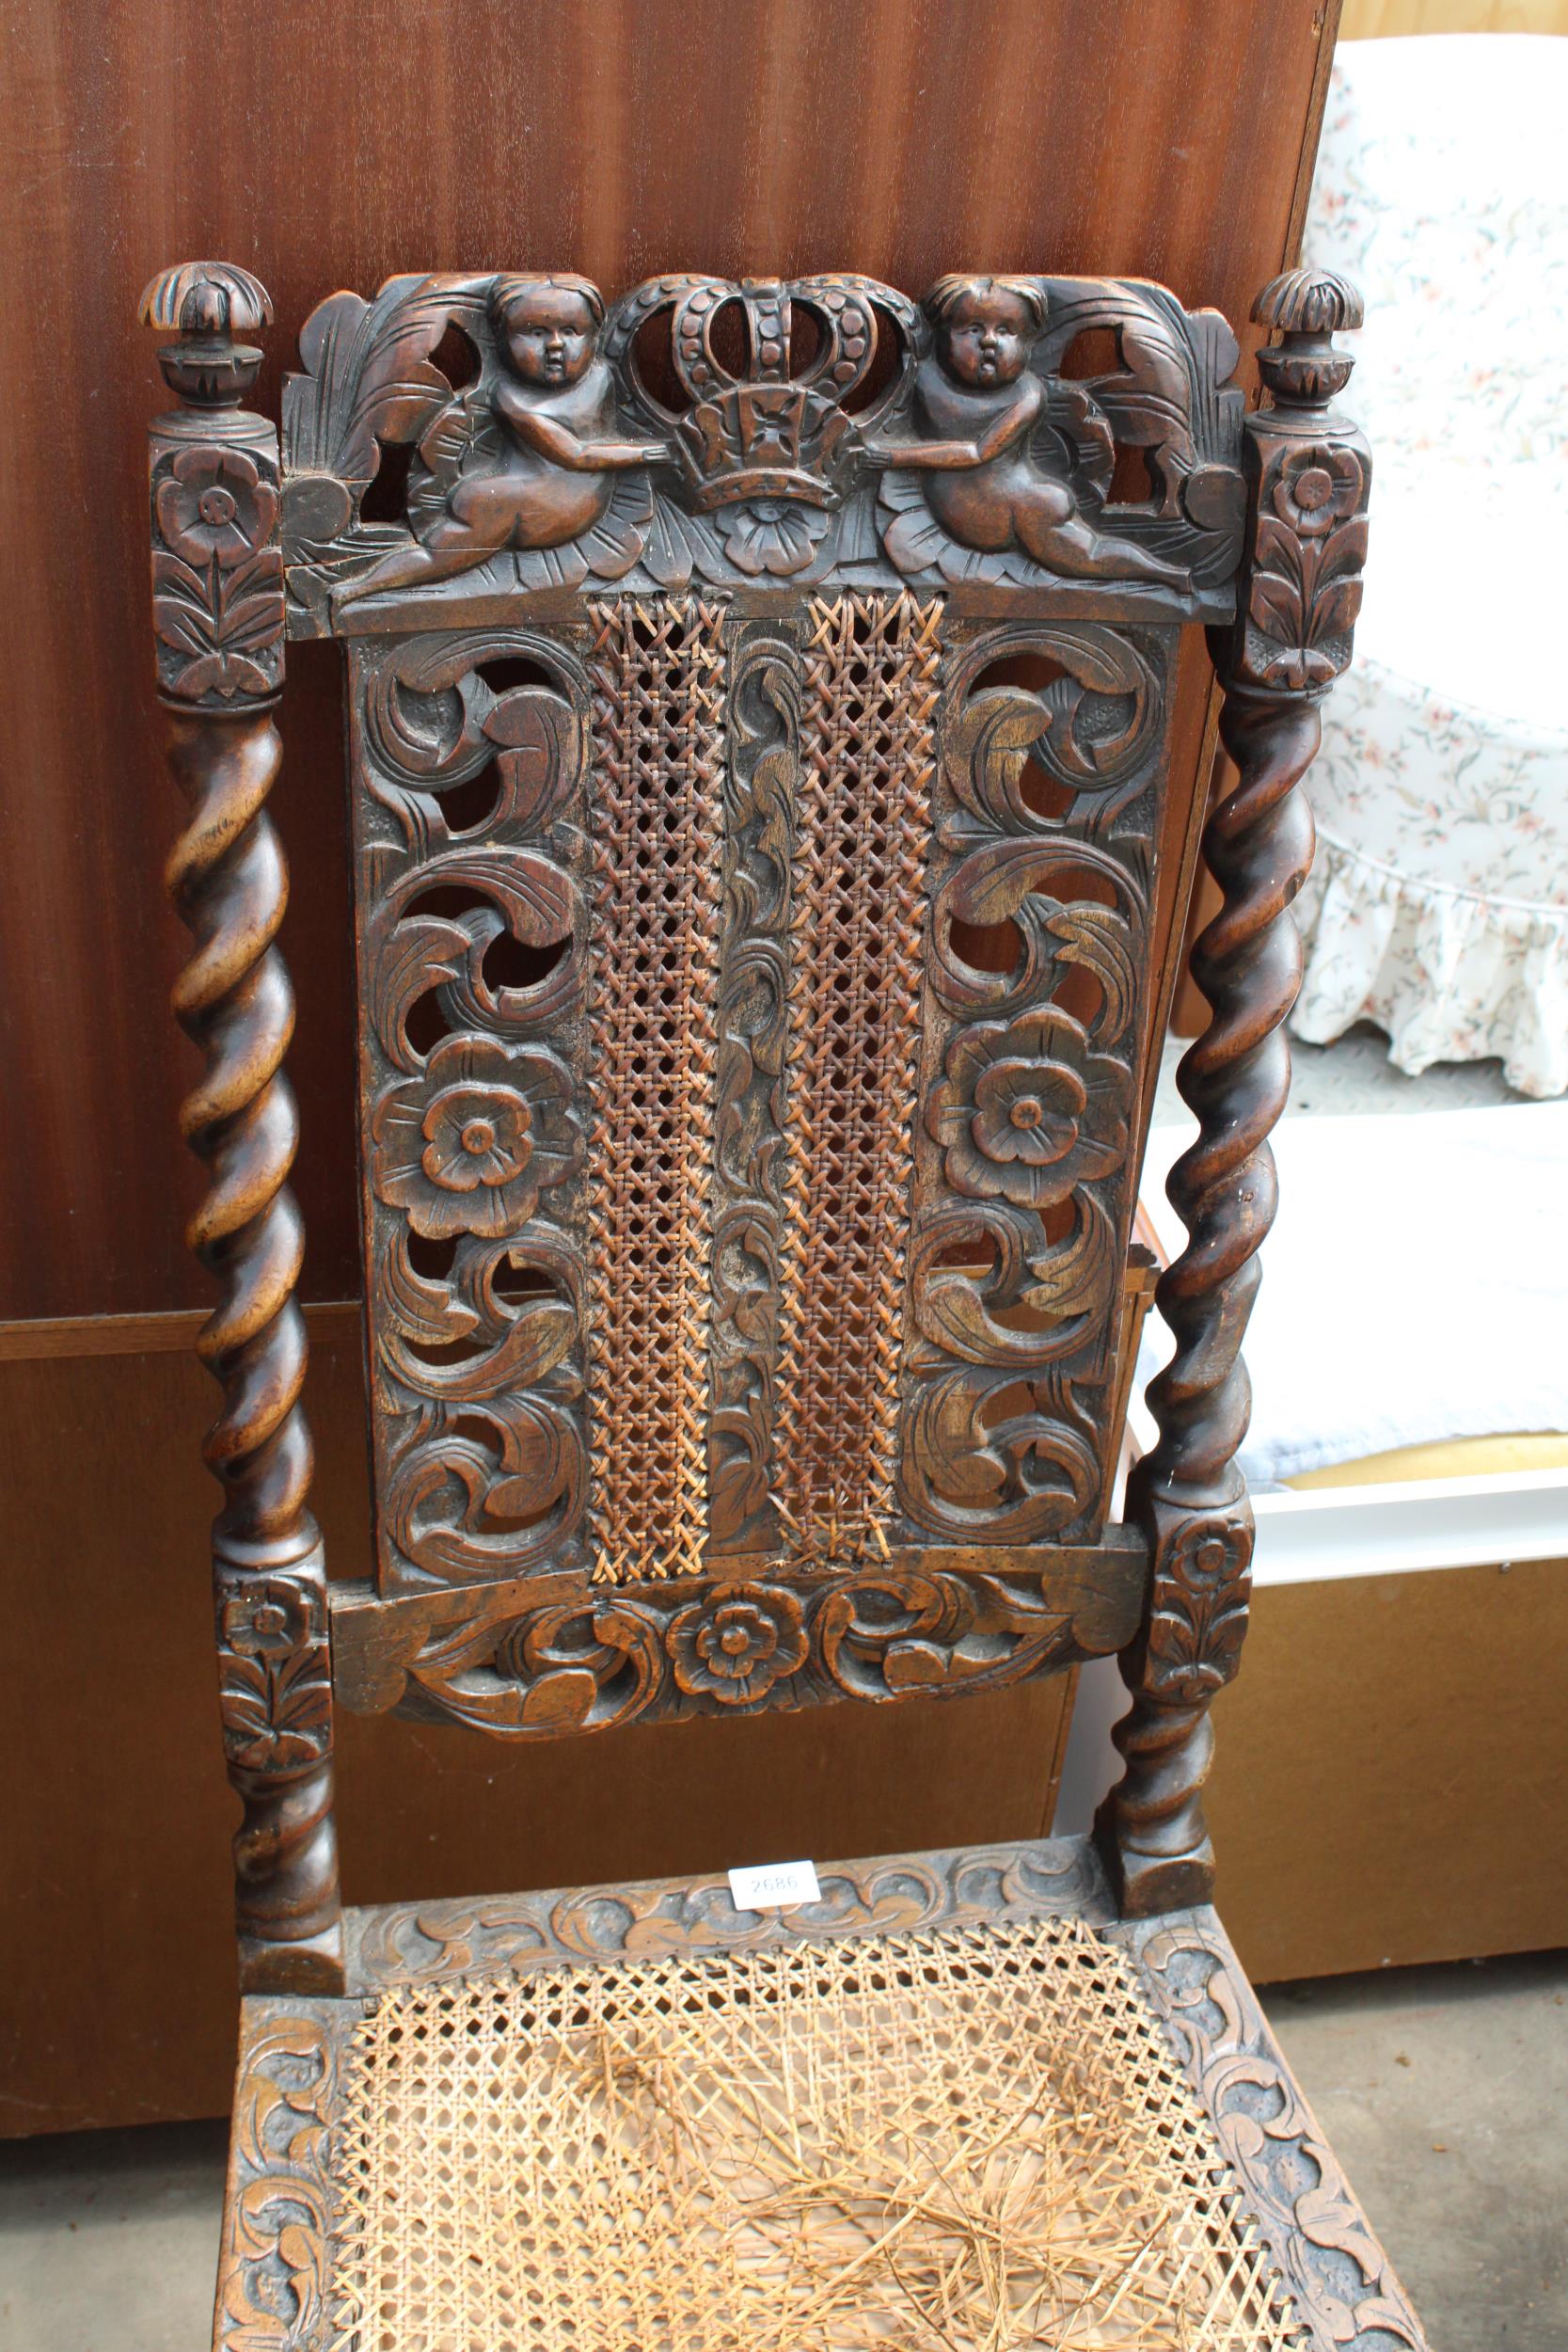 AN OAK JACOBEAN STYLE DINING CHAIR WITH BARLEY-TWIST UPRIGHTS AND STRETCHERS - Image 2 of 3